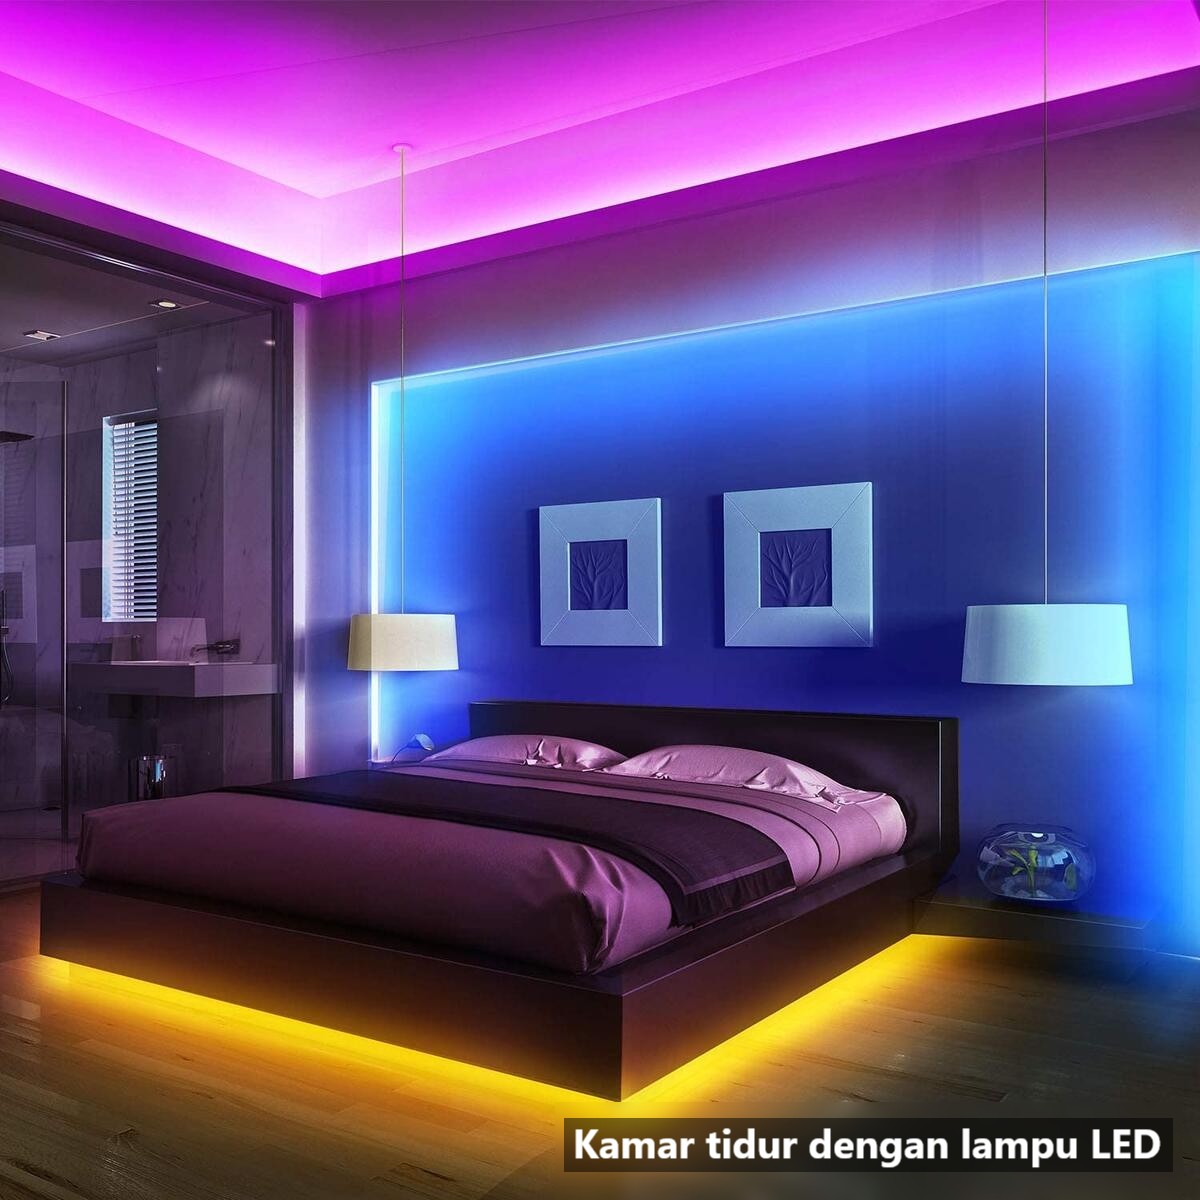 Need Reliable Light During Outages. : Discover LED Recessed Lights With Battery Backup For Your Home